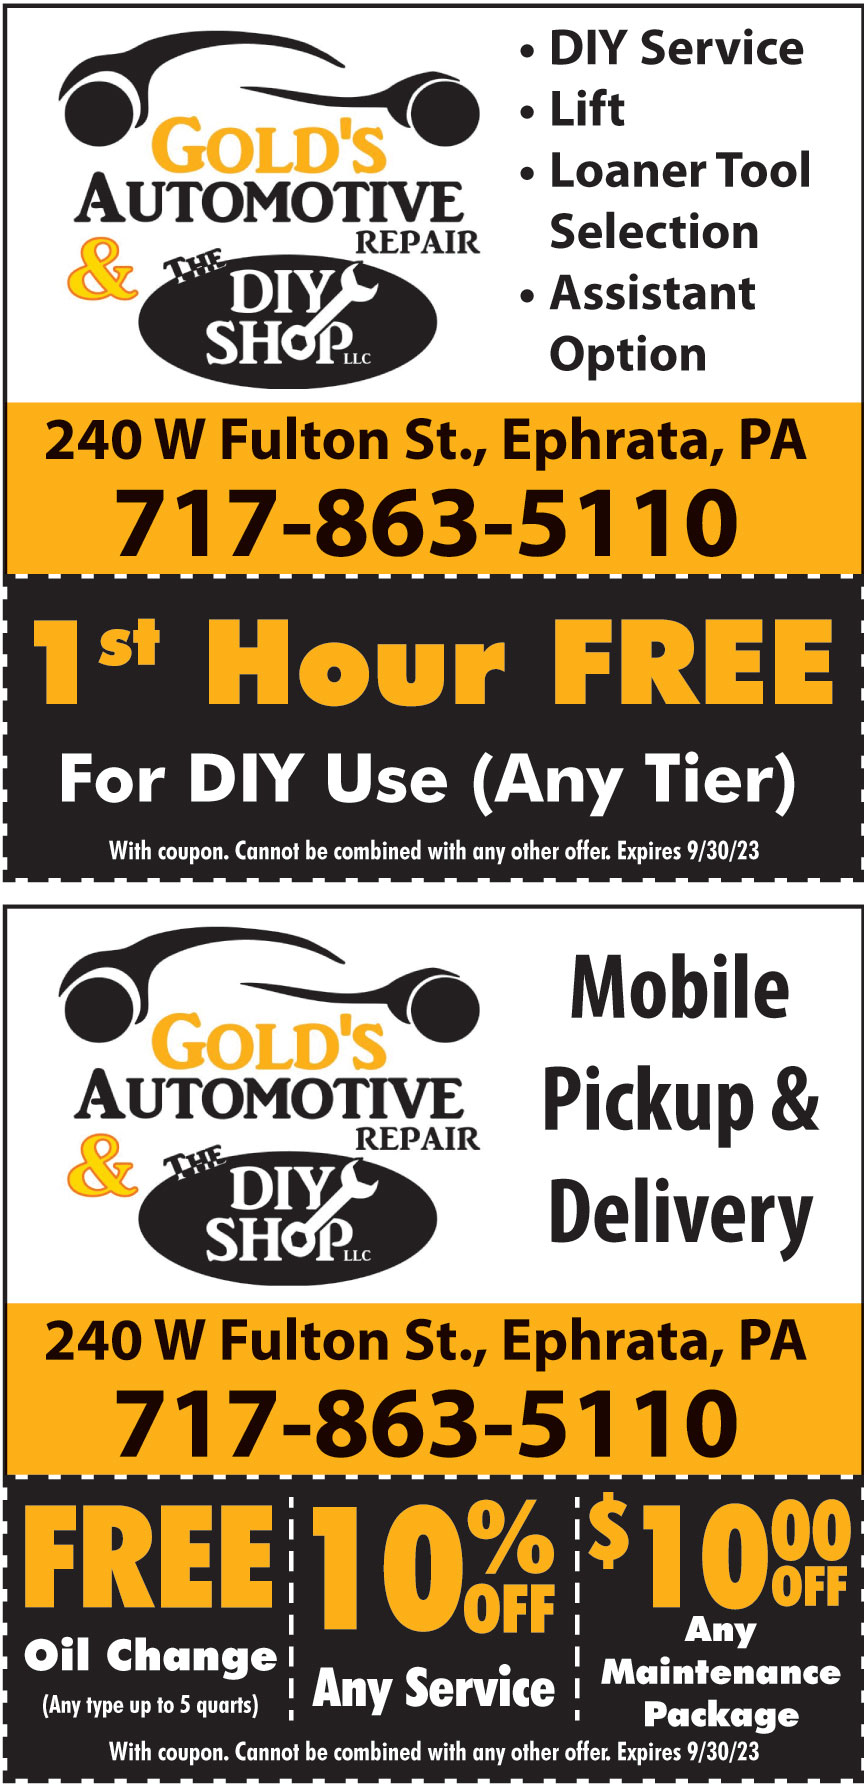 GOLDS AUTOMOTIVE AND DIY